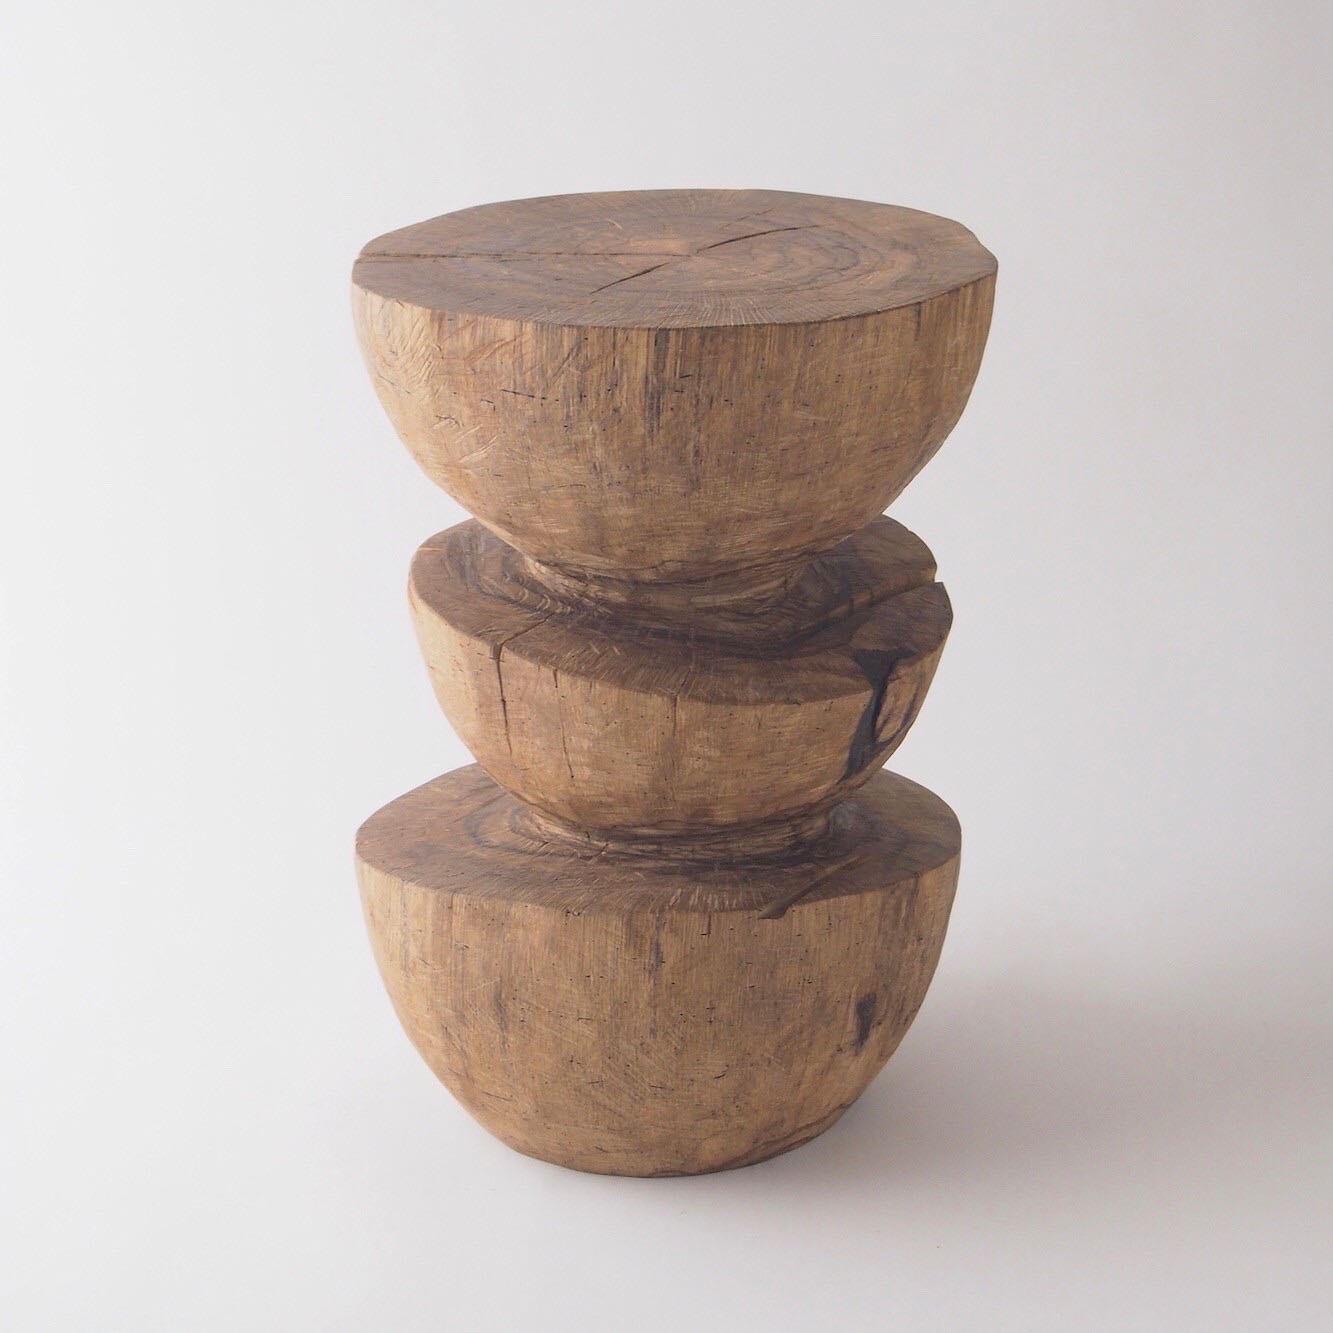 Contemporary Hiroyuki Nishimura Zougei Sculptural Side Table Stool 31 Tribal Glamping For Sale